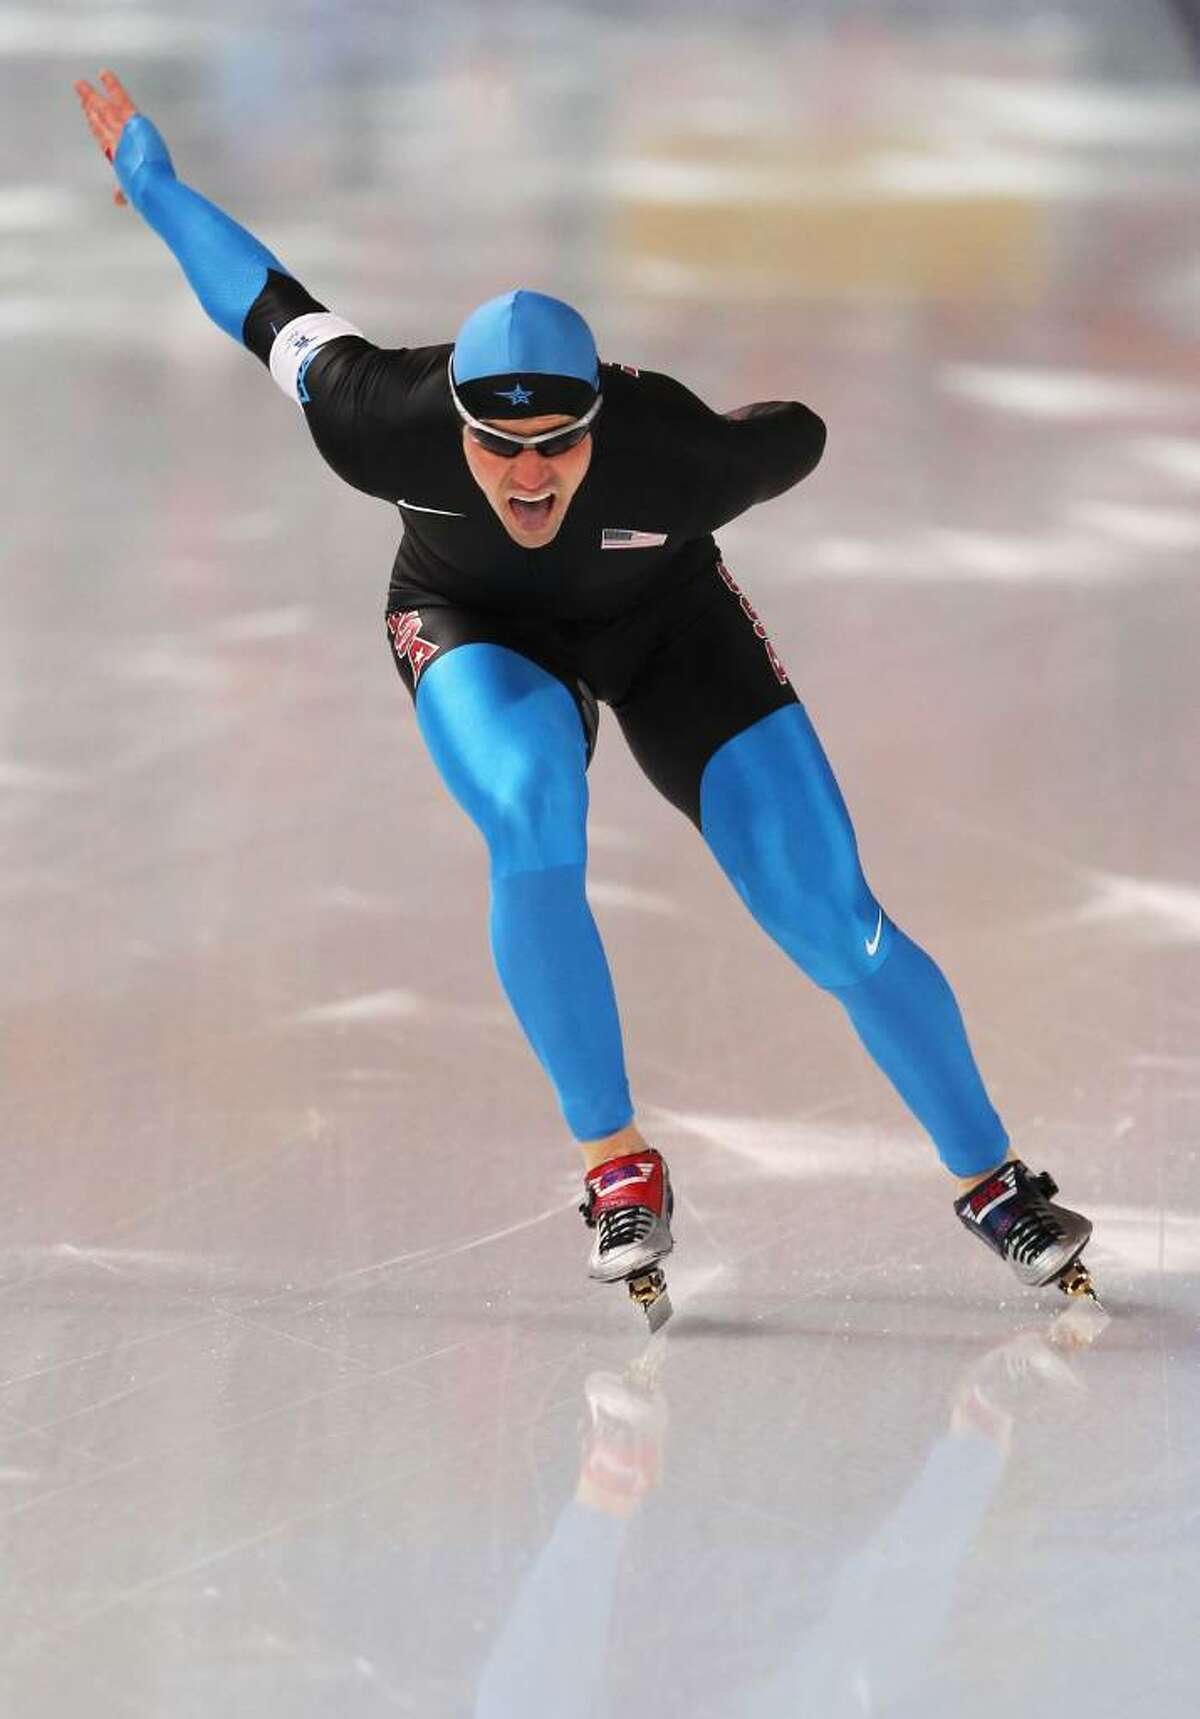 VANCOUVER, BC - FEBRUARY 17: Chad Hedrick of the United States during his men's speed skating 1000 m finals on day six of the Vancouver 2010 Winter Olympics at Richmond Olympic Oval on February 17, 2010 in Vancouver, Canada. (Photo by Jamie Squire/Getty Images) *** Local Caption *** Chad Hedrick